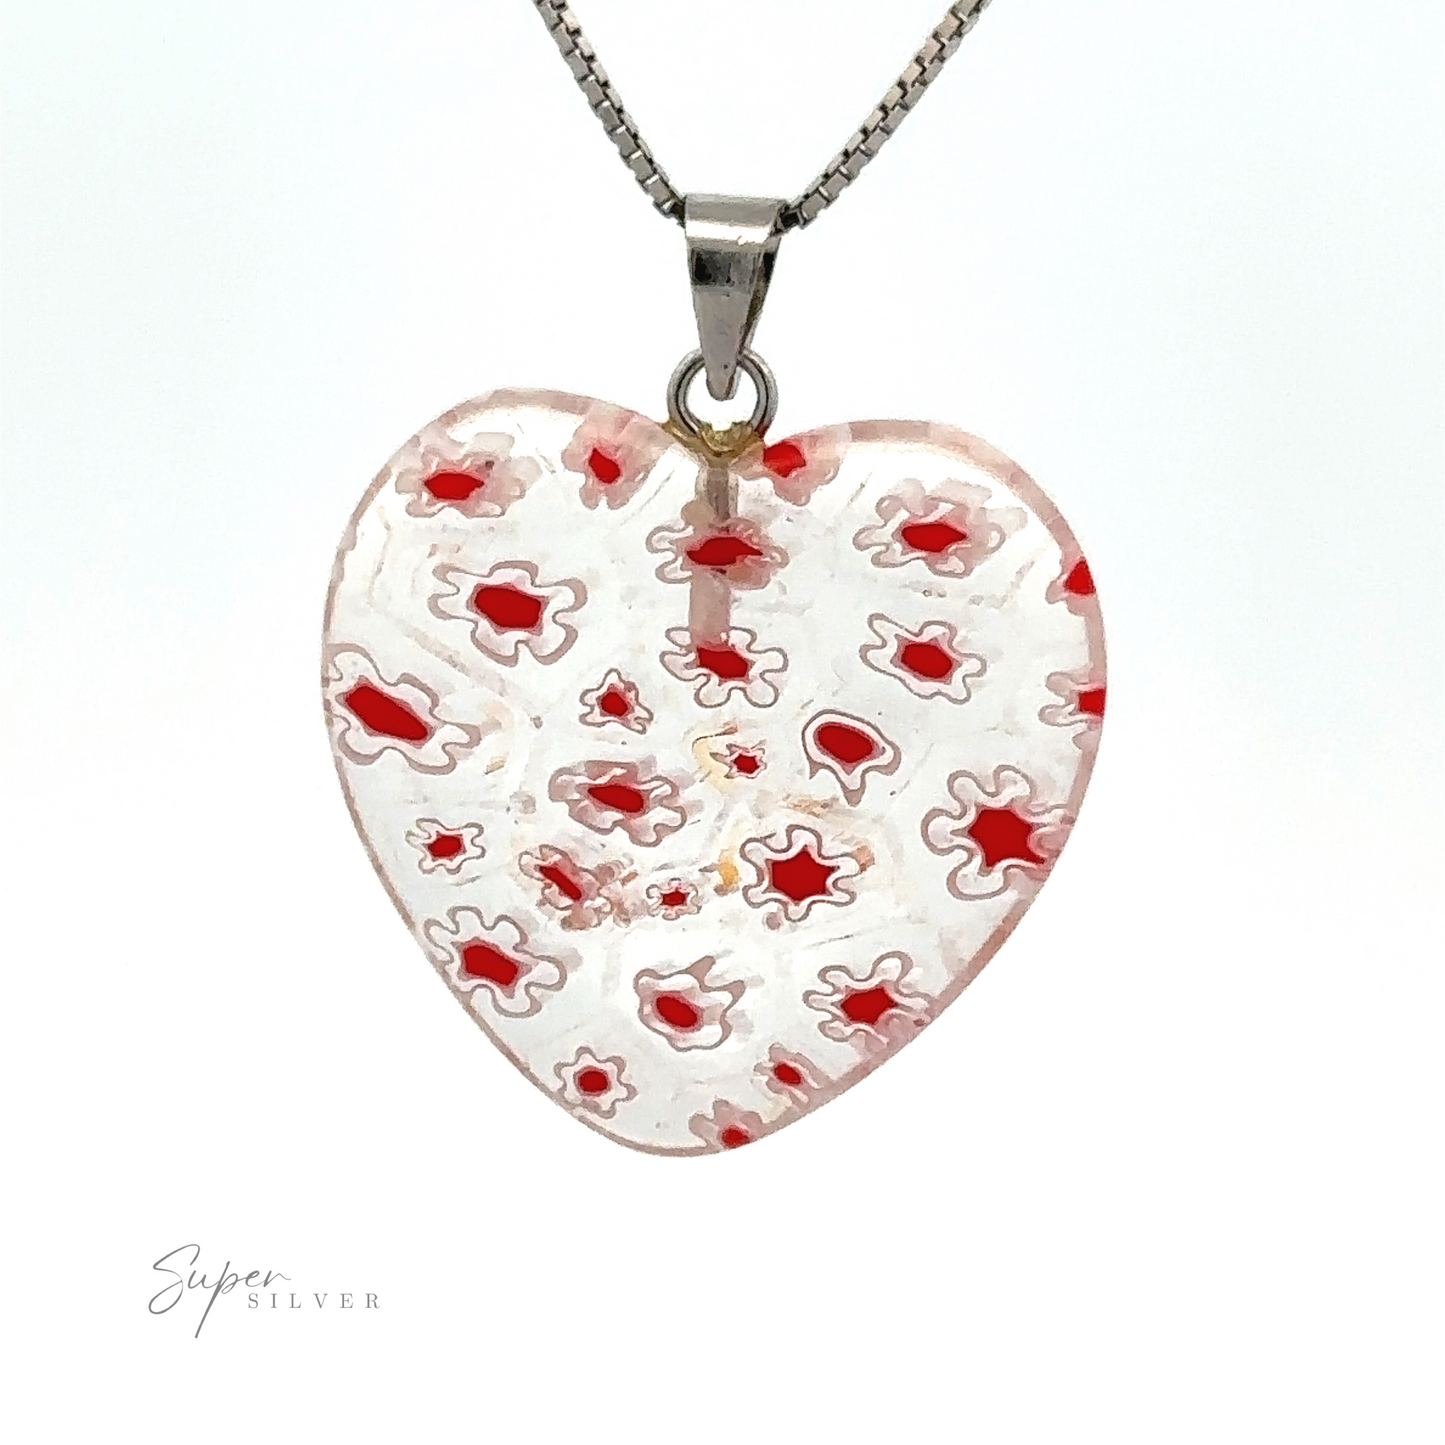 
                  
                    A Heart Pendant with Flower Pattern showcases a clear and red intricate pattern in translucent resin. The hallmark "Super Silver" is visible in the bottom left corner, adding a touch of authenticity to this charming piece.
                  
                